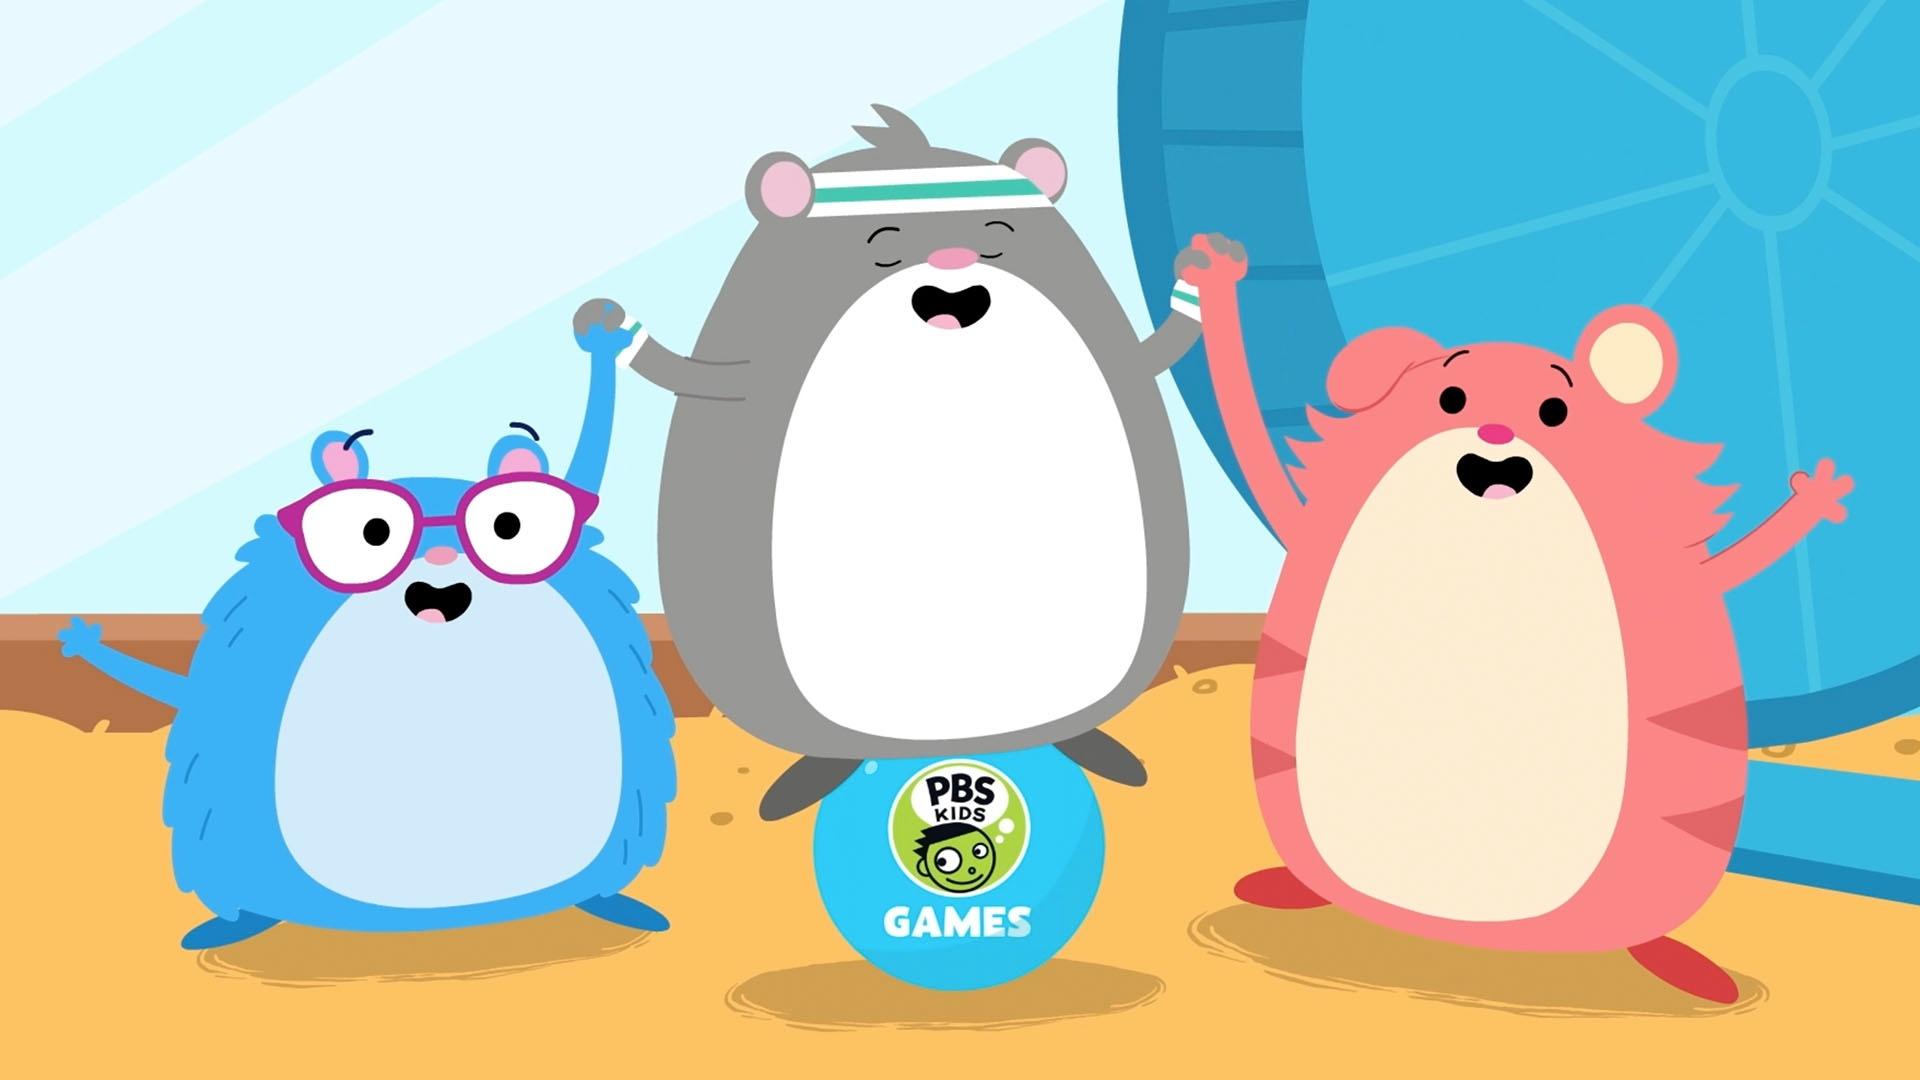 Play New Games like Team Hamster on the PBS KIDS Games App!